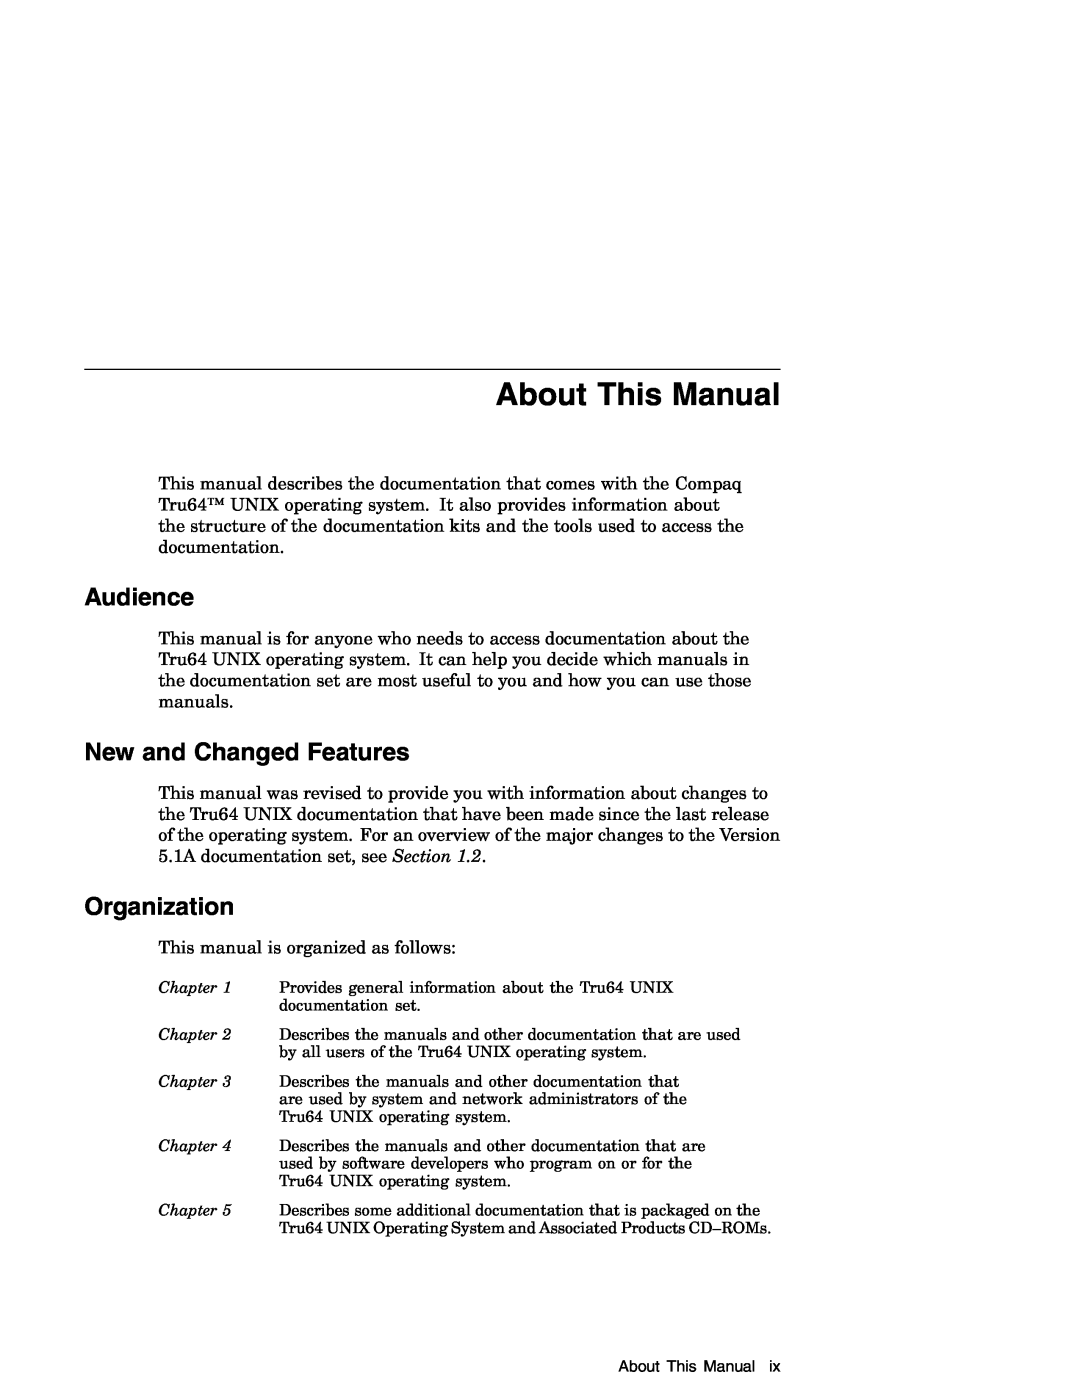 Compaq AA-RH8RD-TE manual About This Manual, Audience, New and Changed Features, Organization 